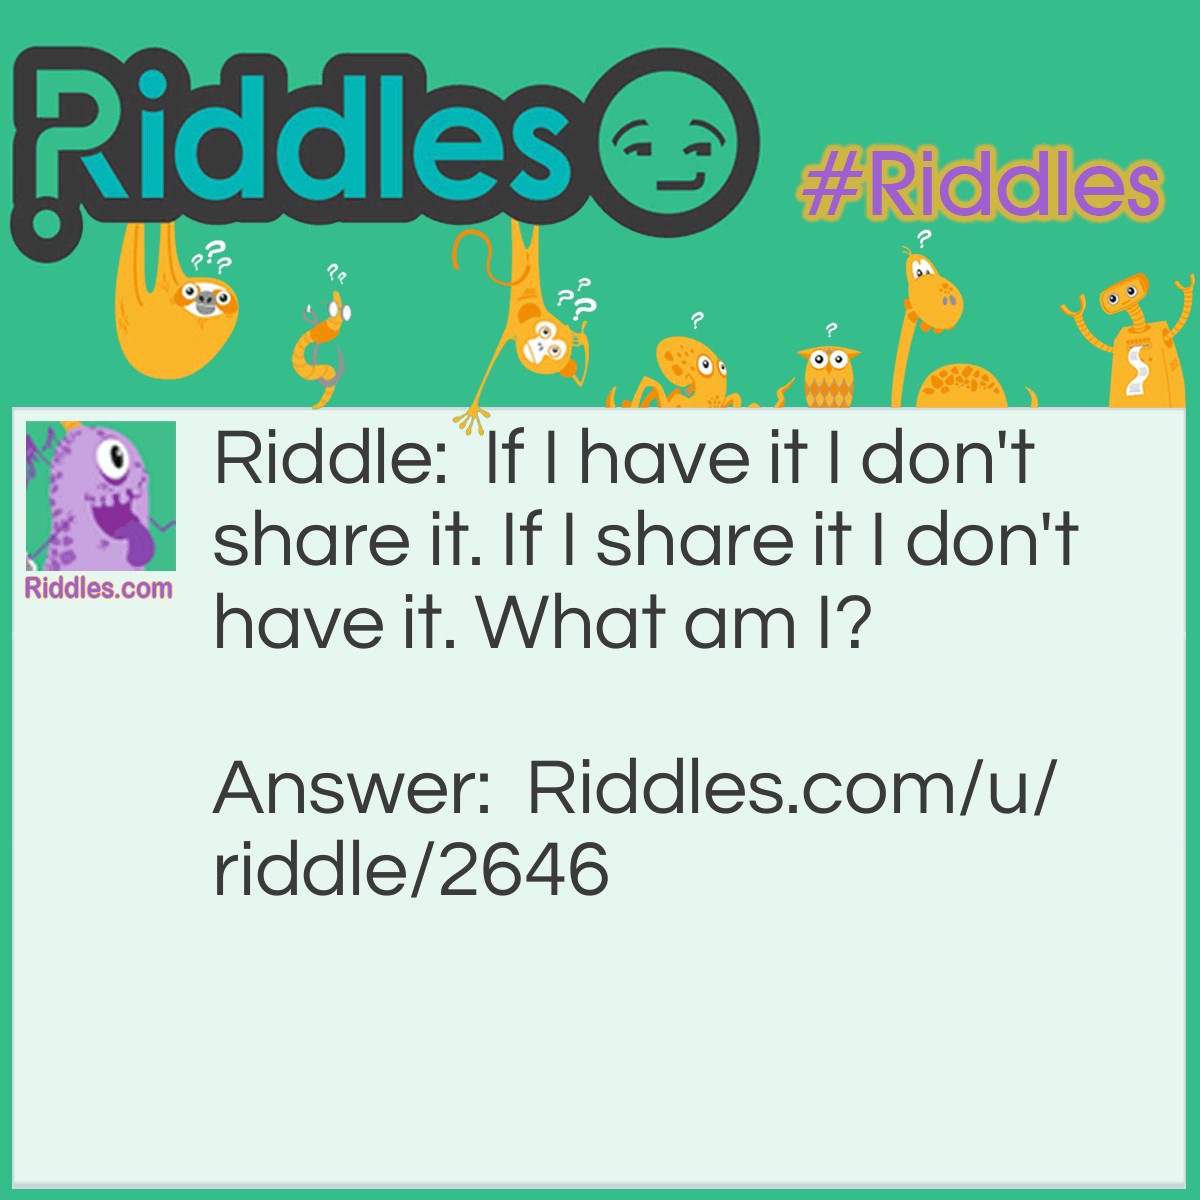 Riddle: If I have it I don't share it. If I share it I don't have it. What am I? Answer: A bag of chips. (The original answer is a secret but chips disappear faster.)